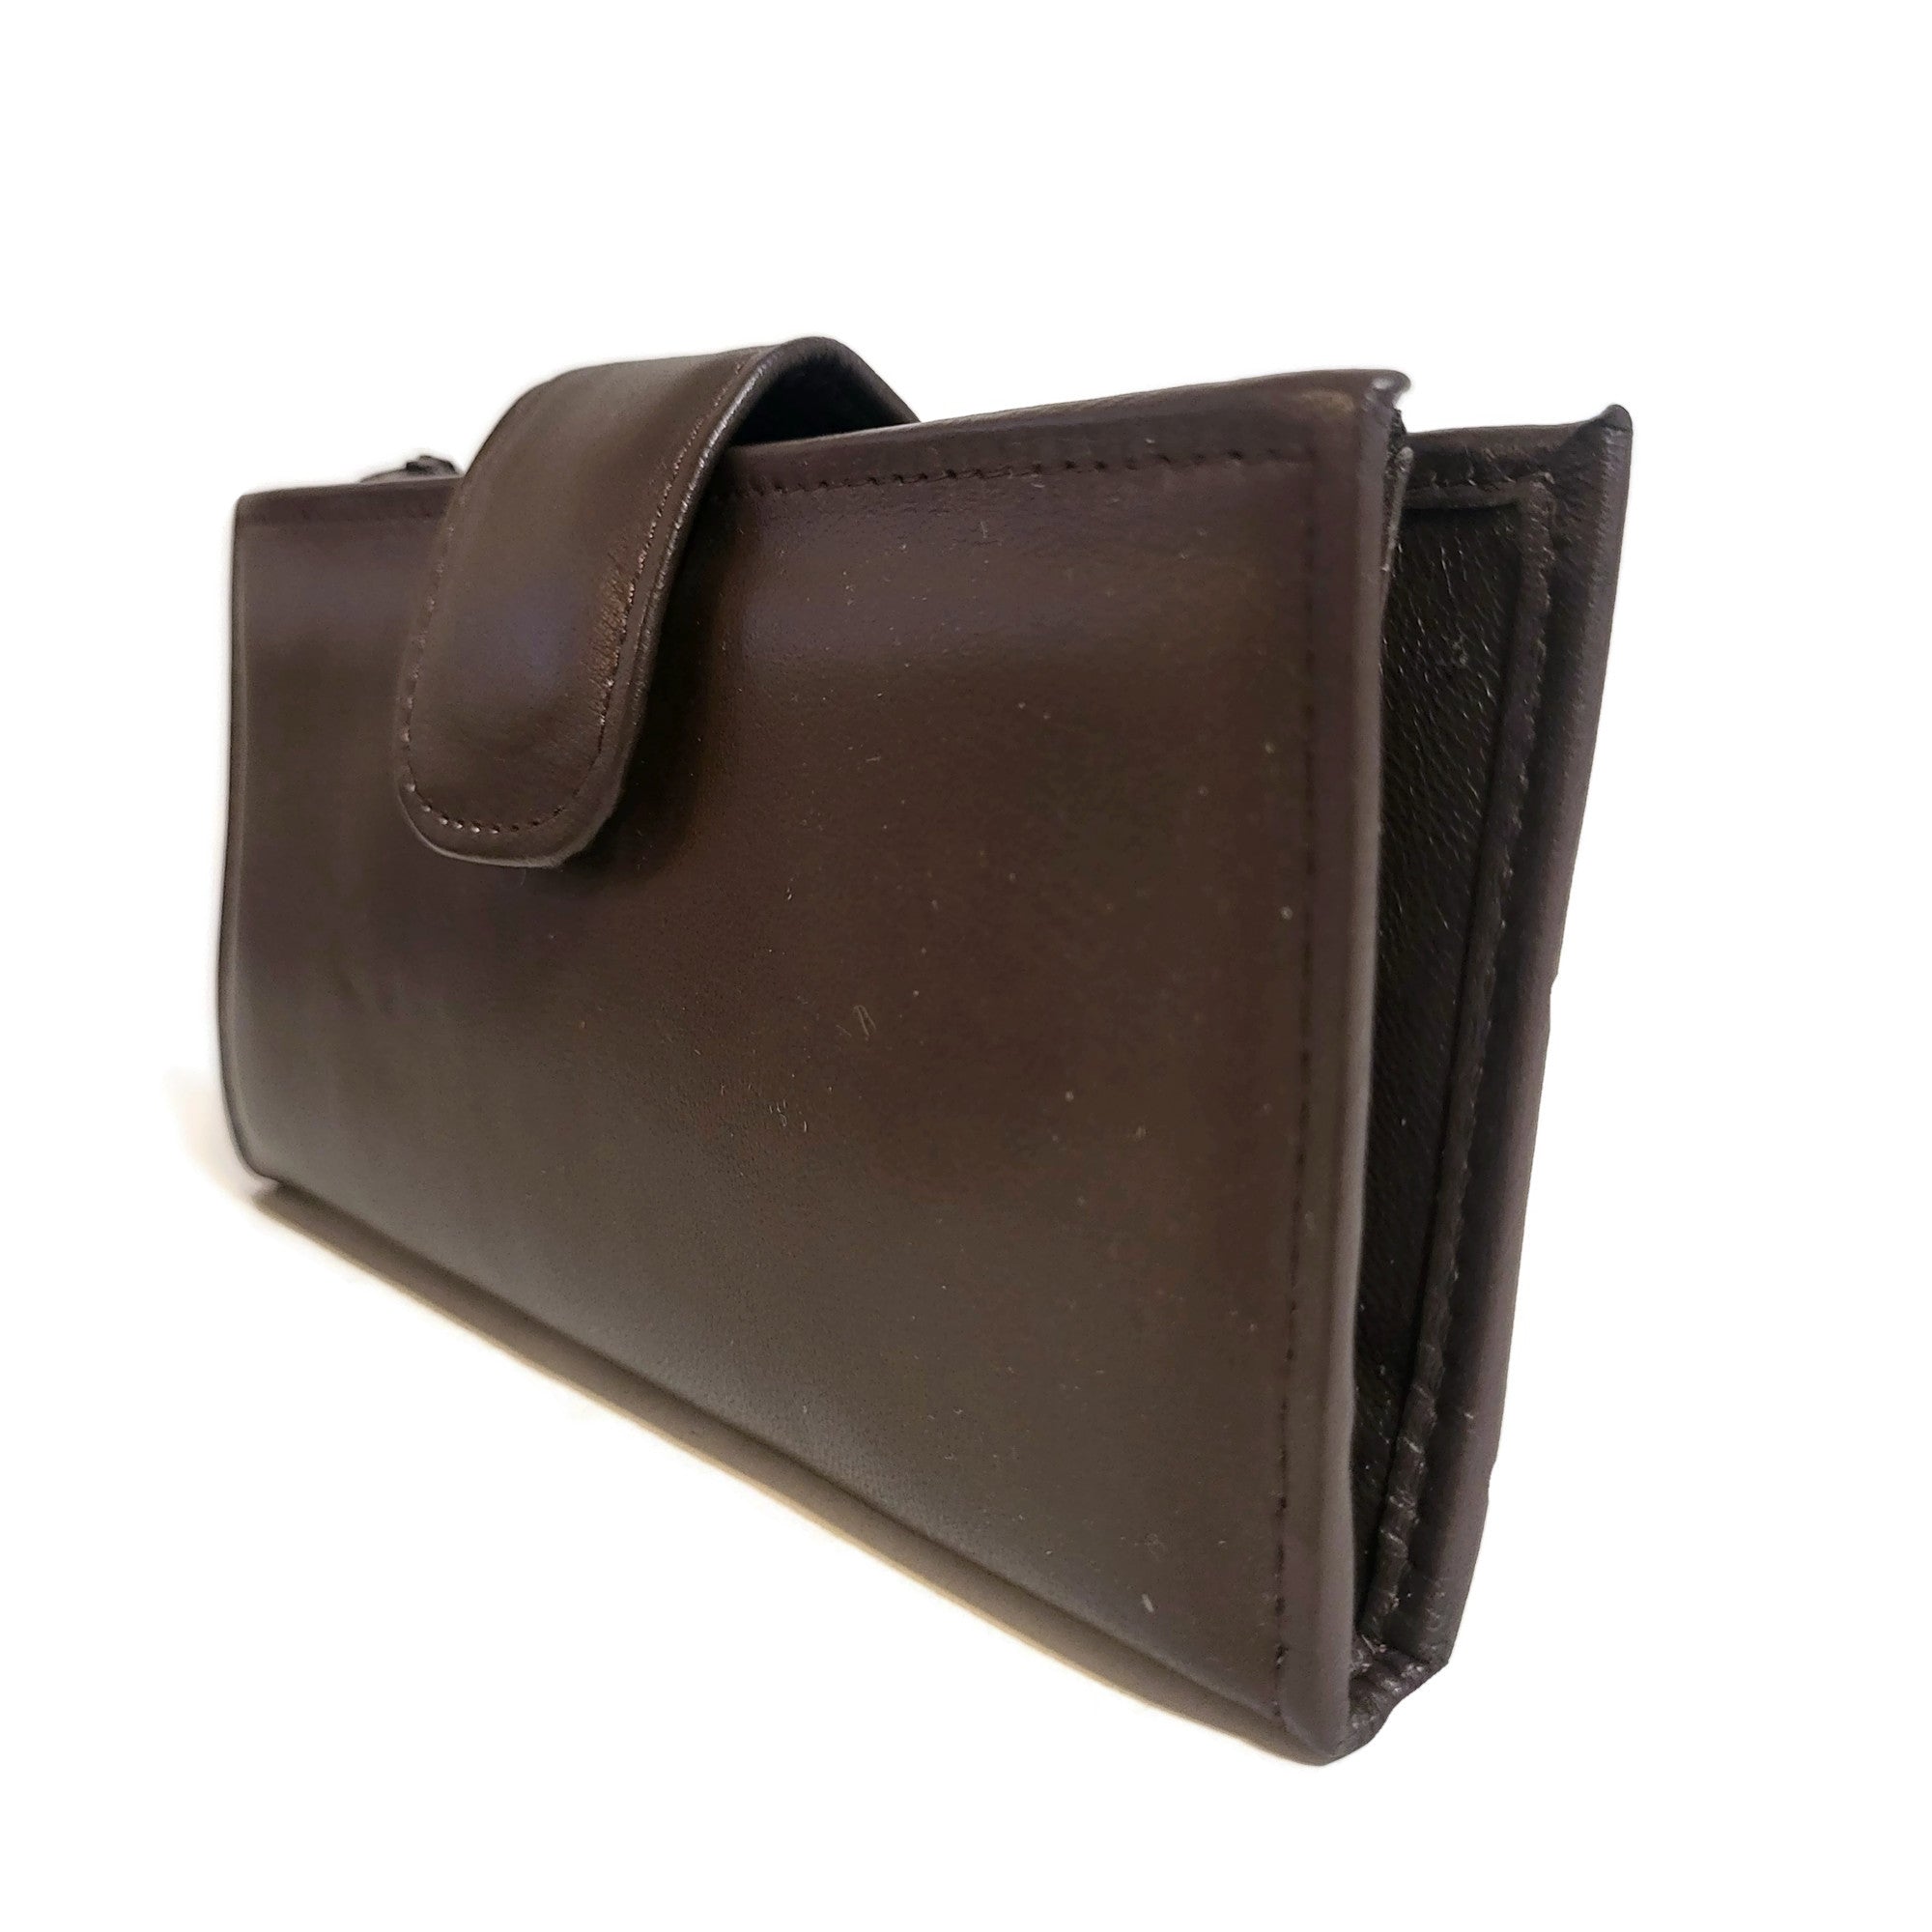 Large leather wallet for woman, with zipper